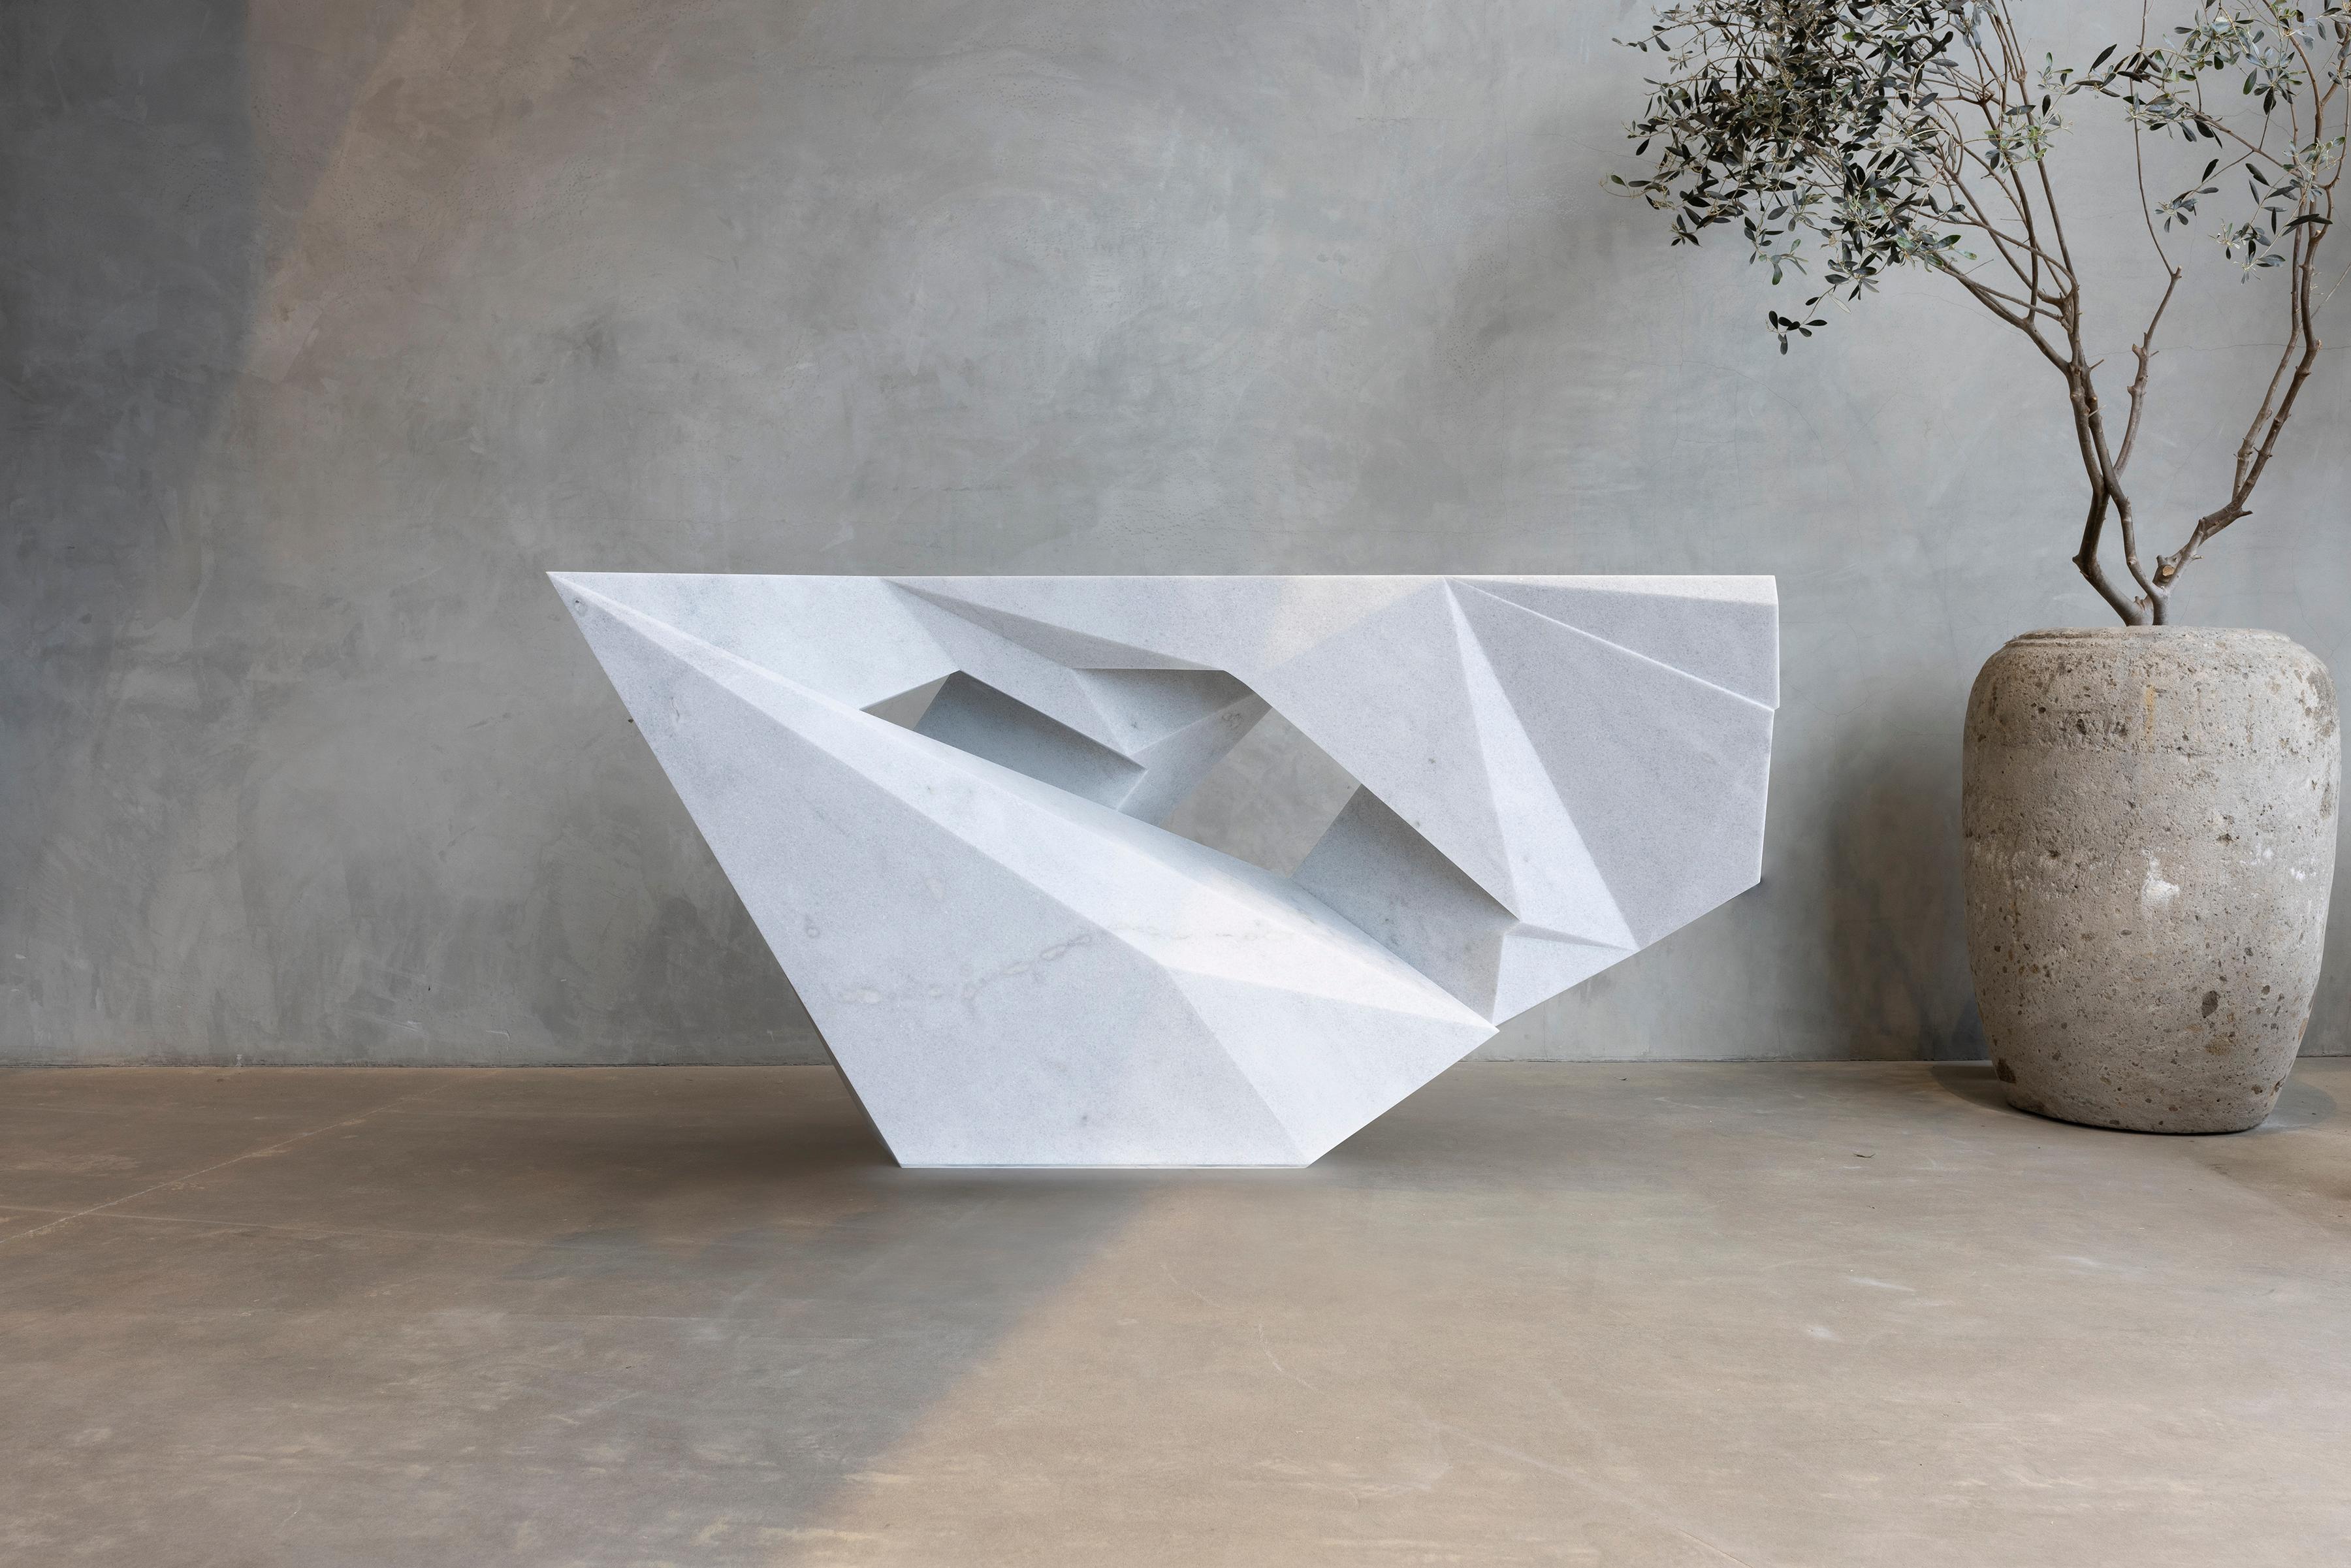 The Berg Chair by William Emmerson
Limited Edition Of 2 Pieces.
Dimensions: D 36,5 x W 66,5 x H 39 cm.
Materials: Naxos marble.
 
A shape. A floating mass of white marble turned into a piece of functional sculpture representing the beauty behind